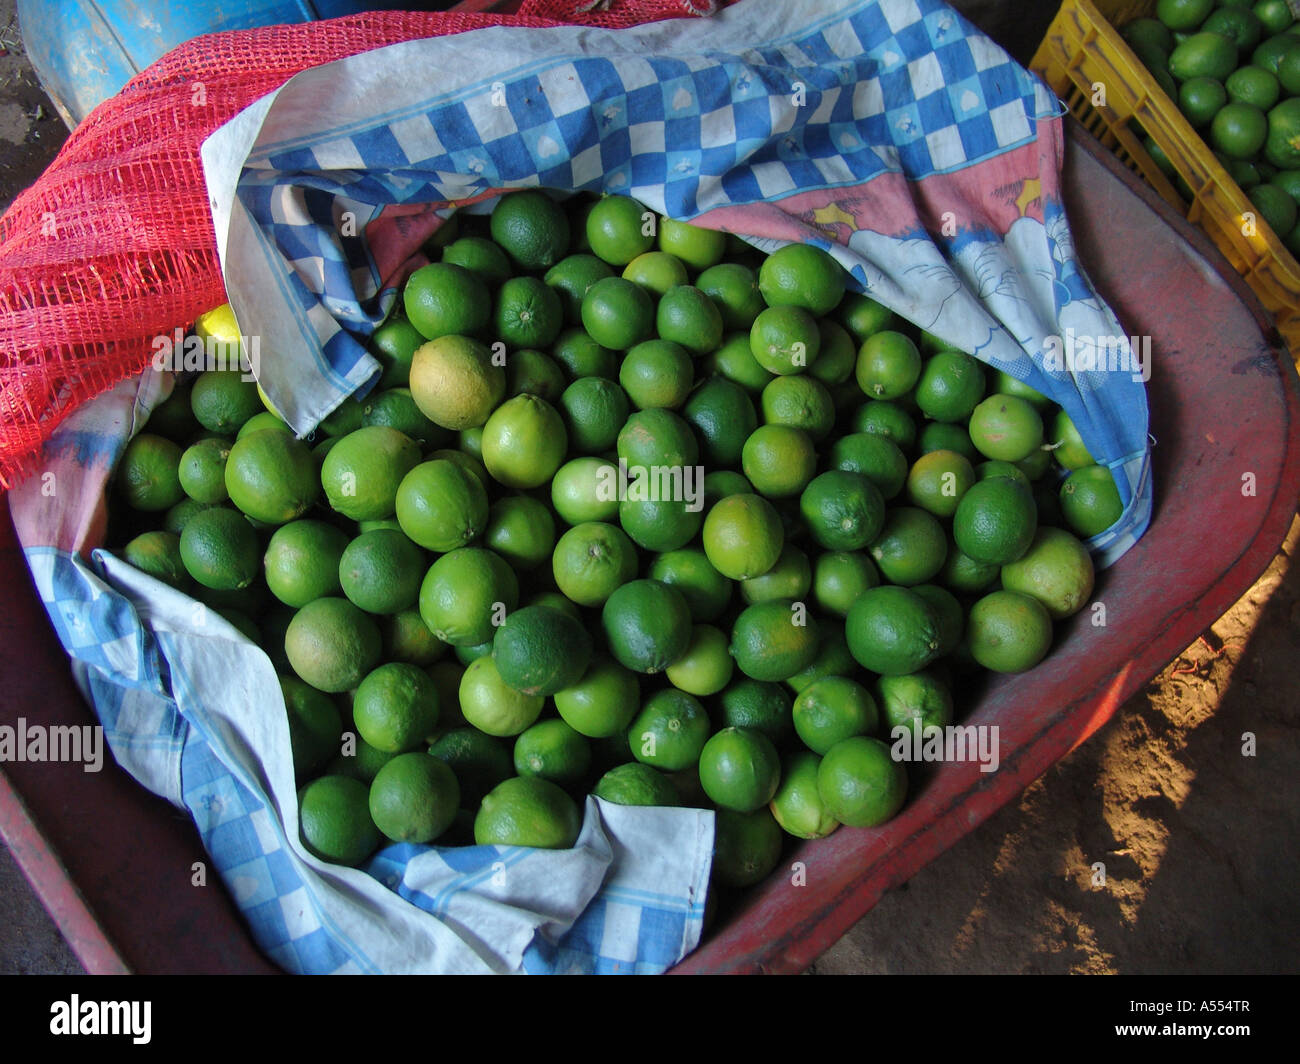 Painet ip2496 salvador basket fresh limes san francsisco javier country developing nation less economically developed Stock Photo